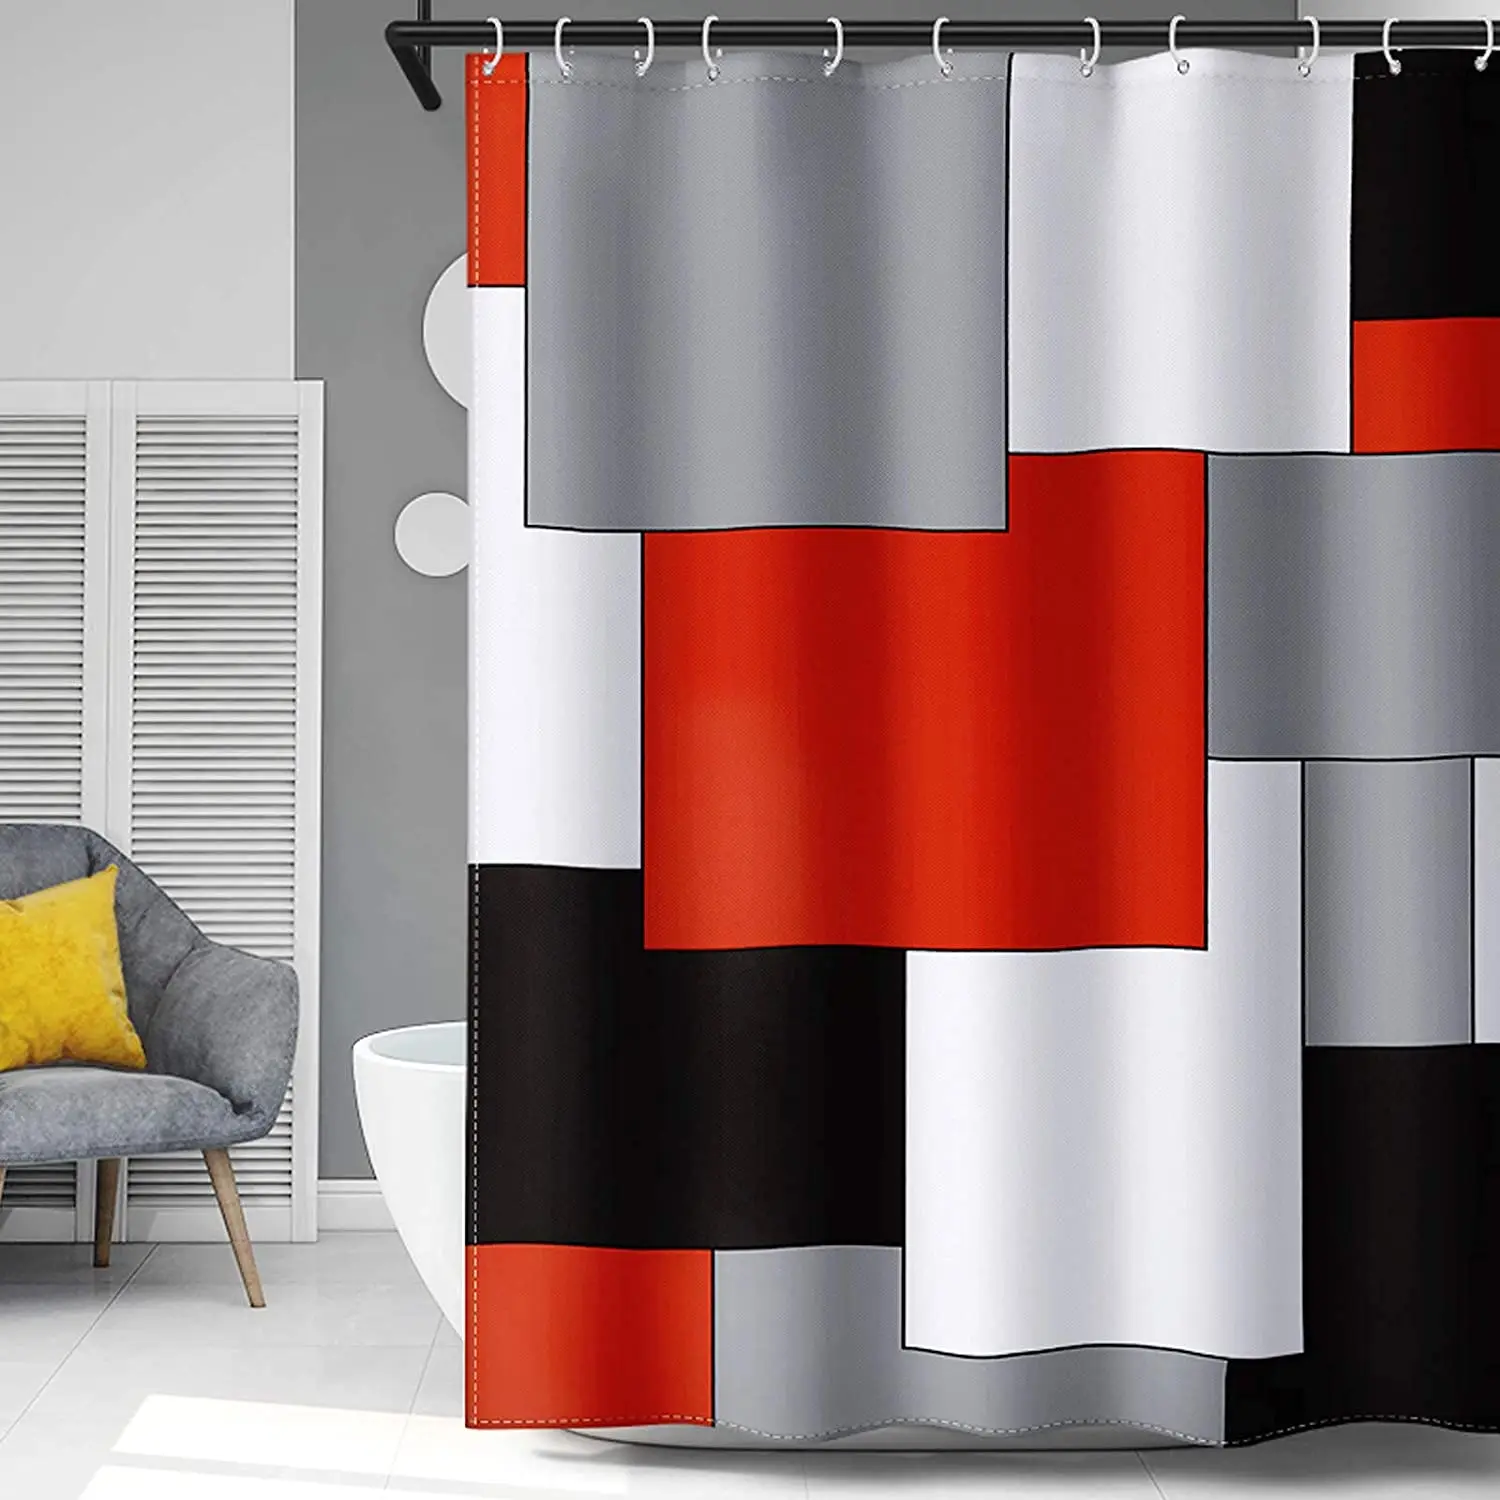 Abstract 3D Black Red Pattern Shower Curtain Set Bathroom Polyester Fabric Hooks 